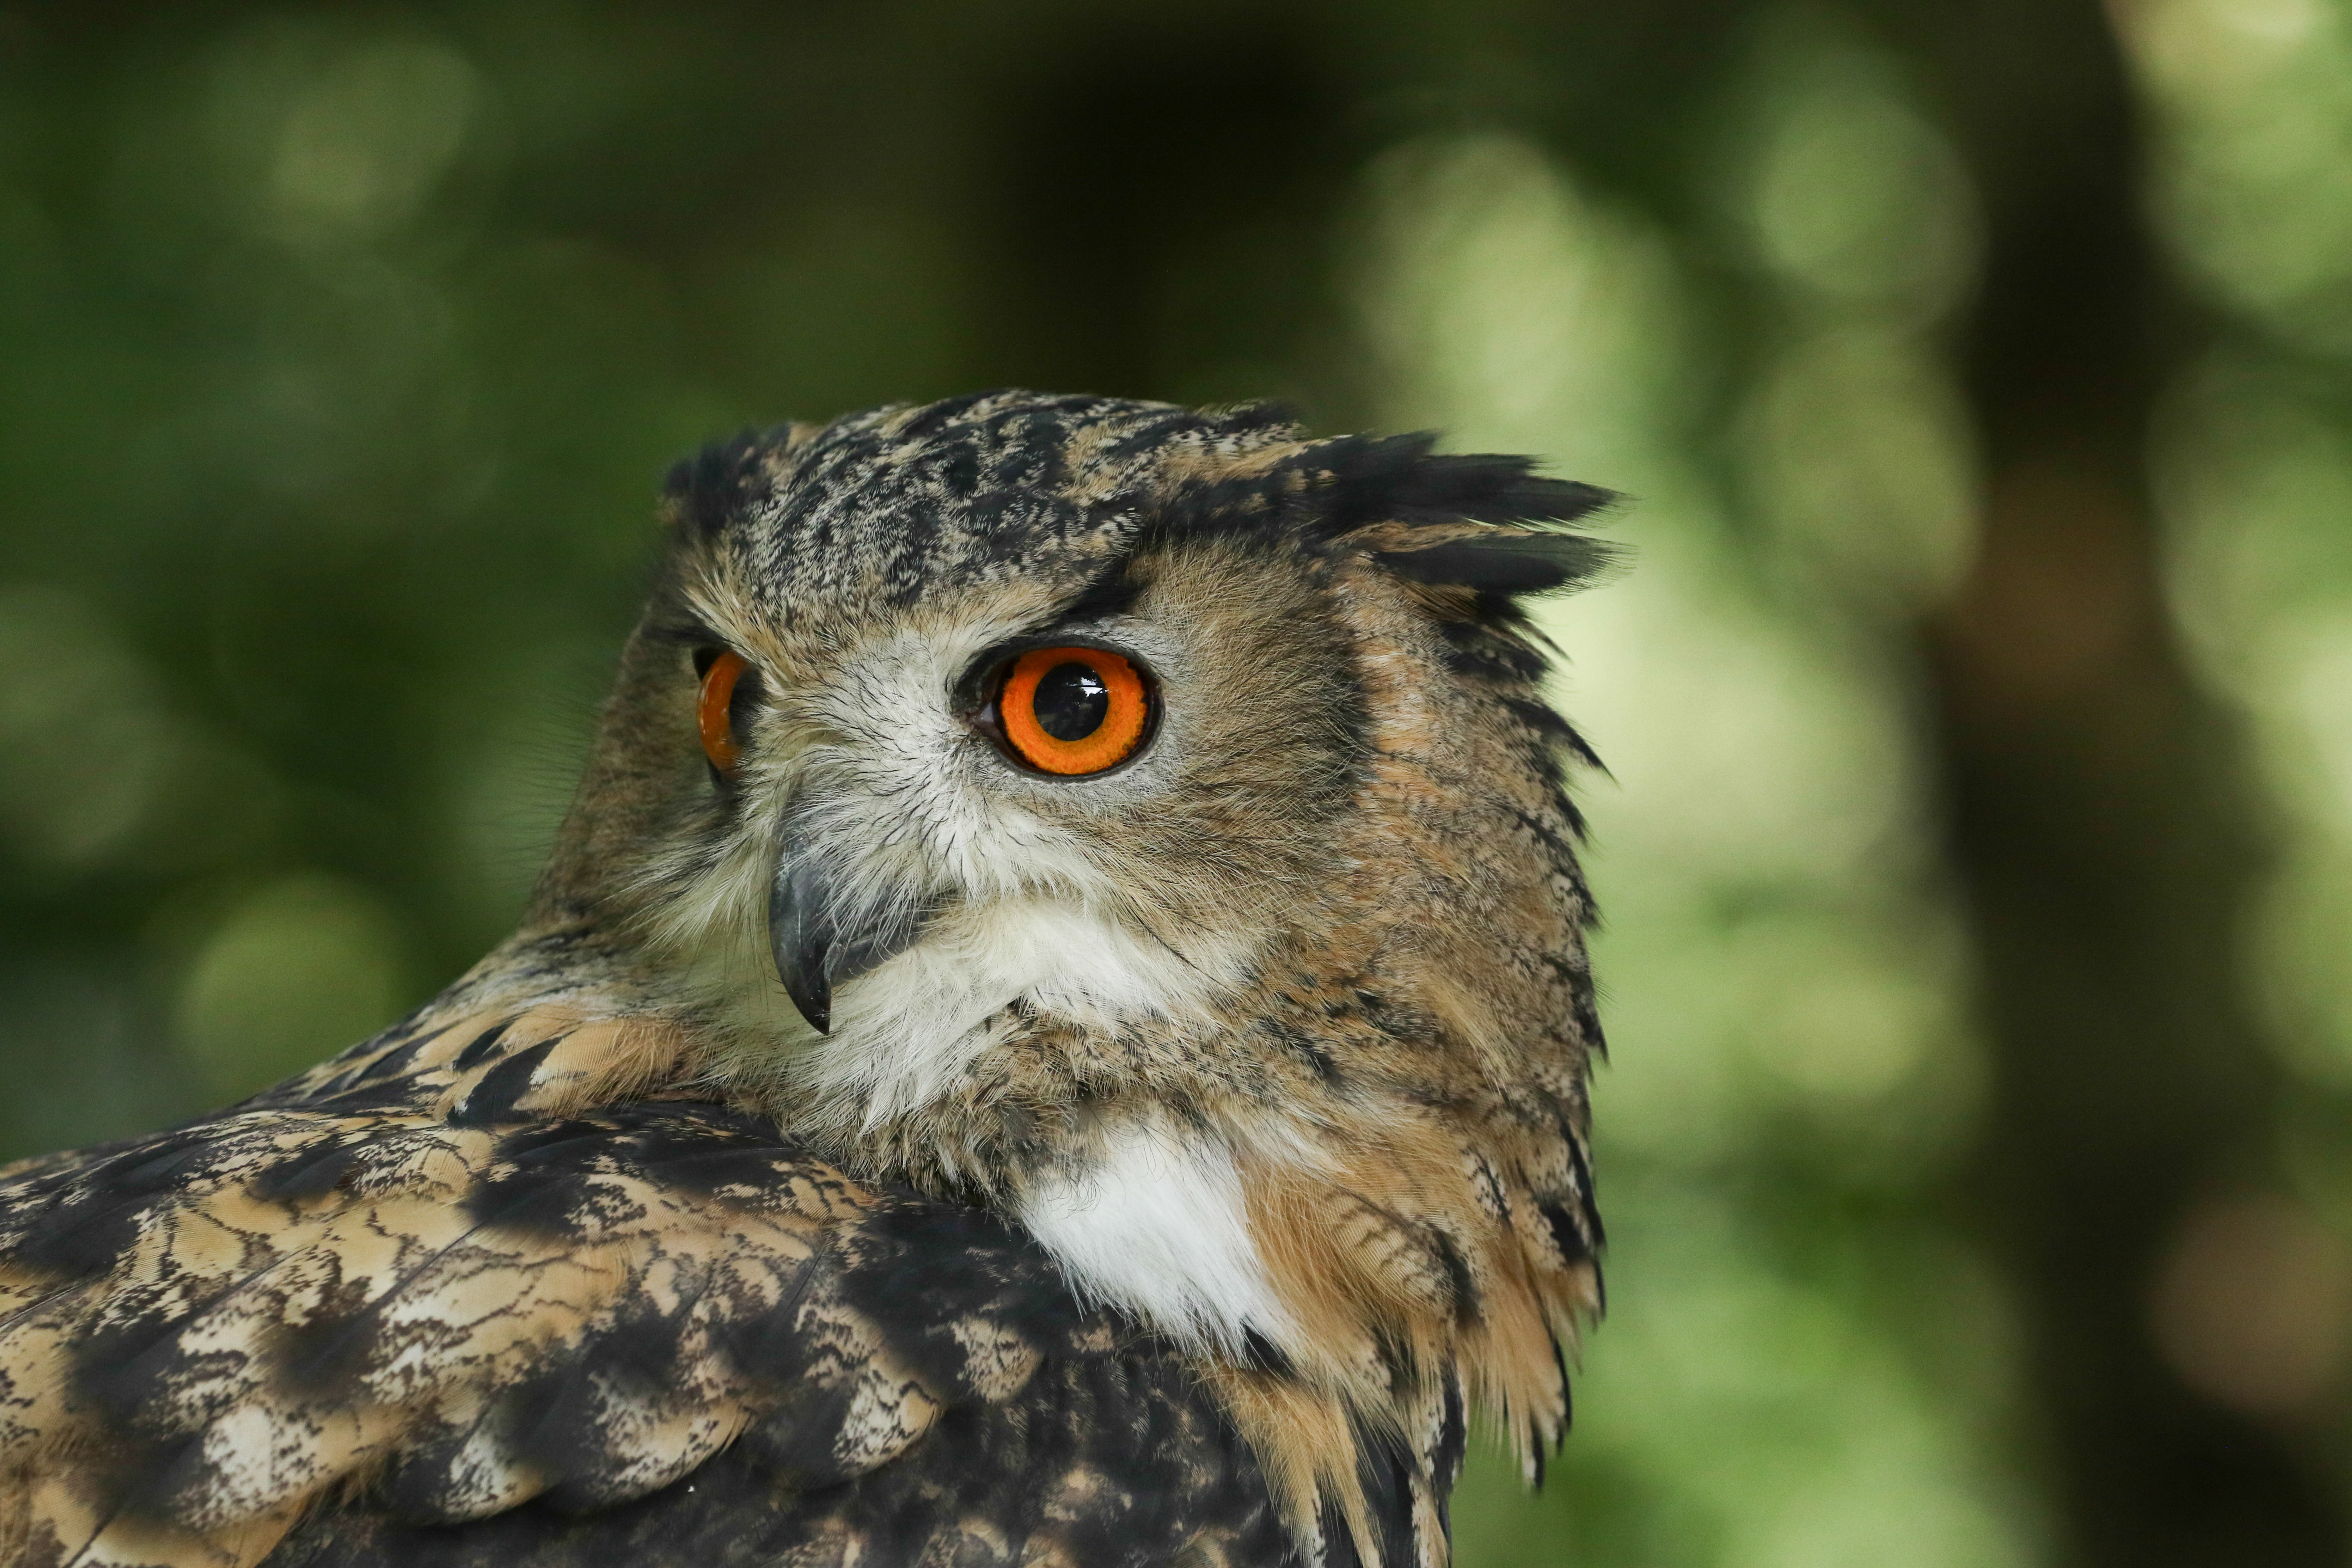 Eurasian eagle owl with piercing orange eyes with ear tufts and speckled feathers looking towards the left